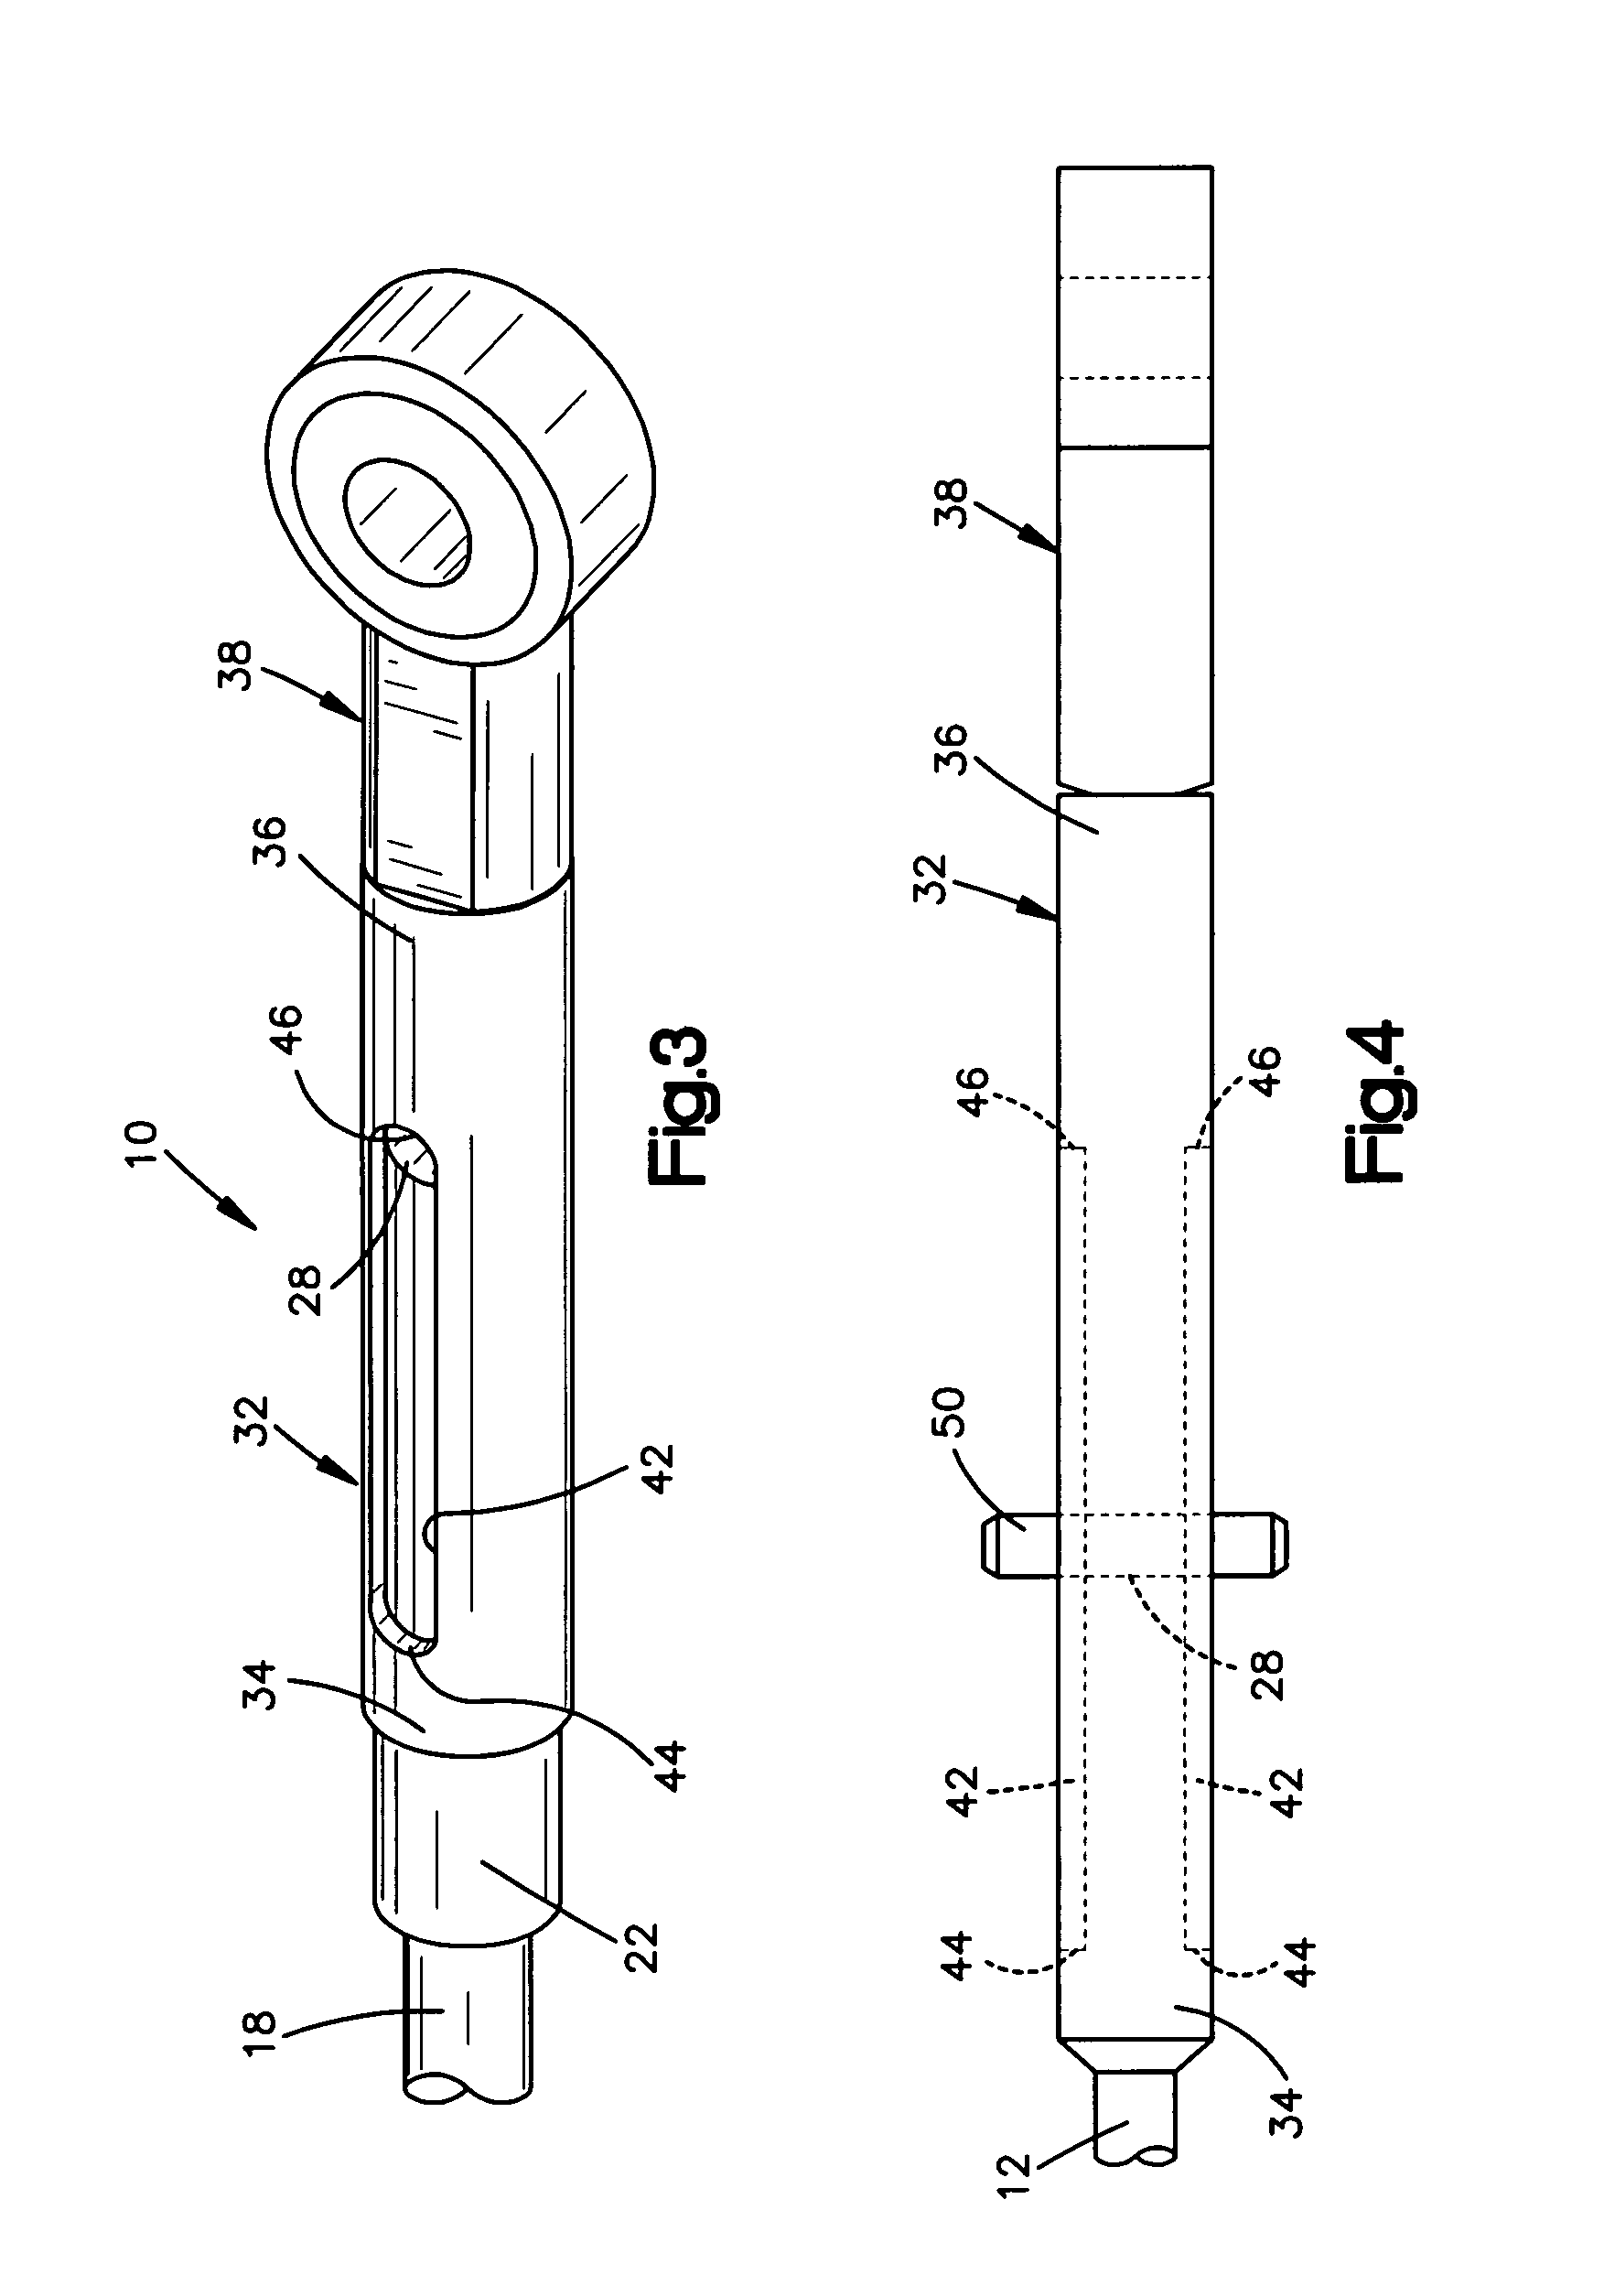 Lost motion mechanism for movable vehicle implements